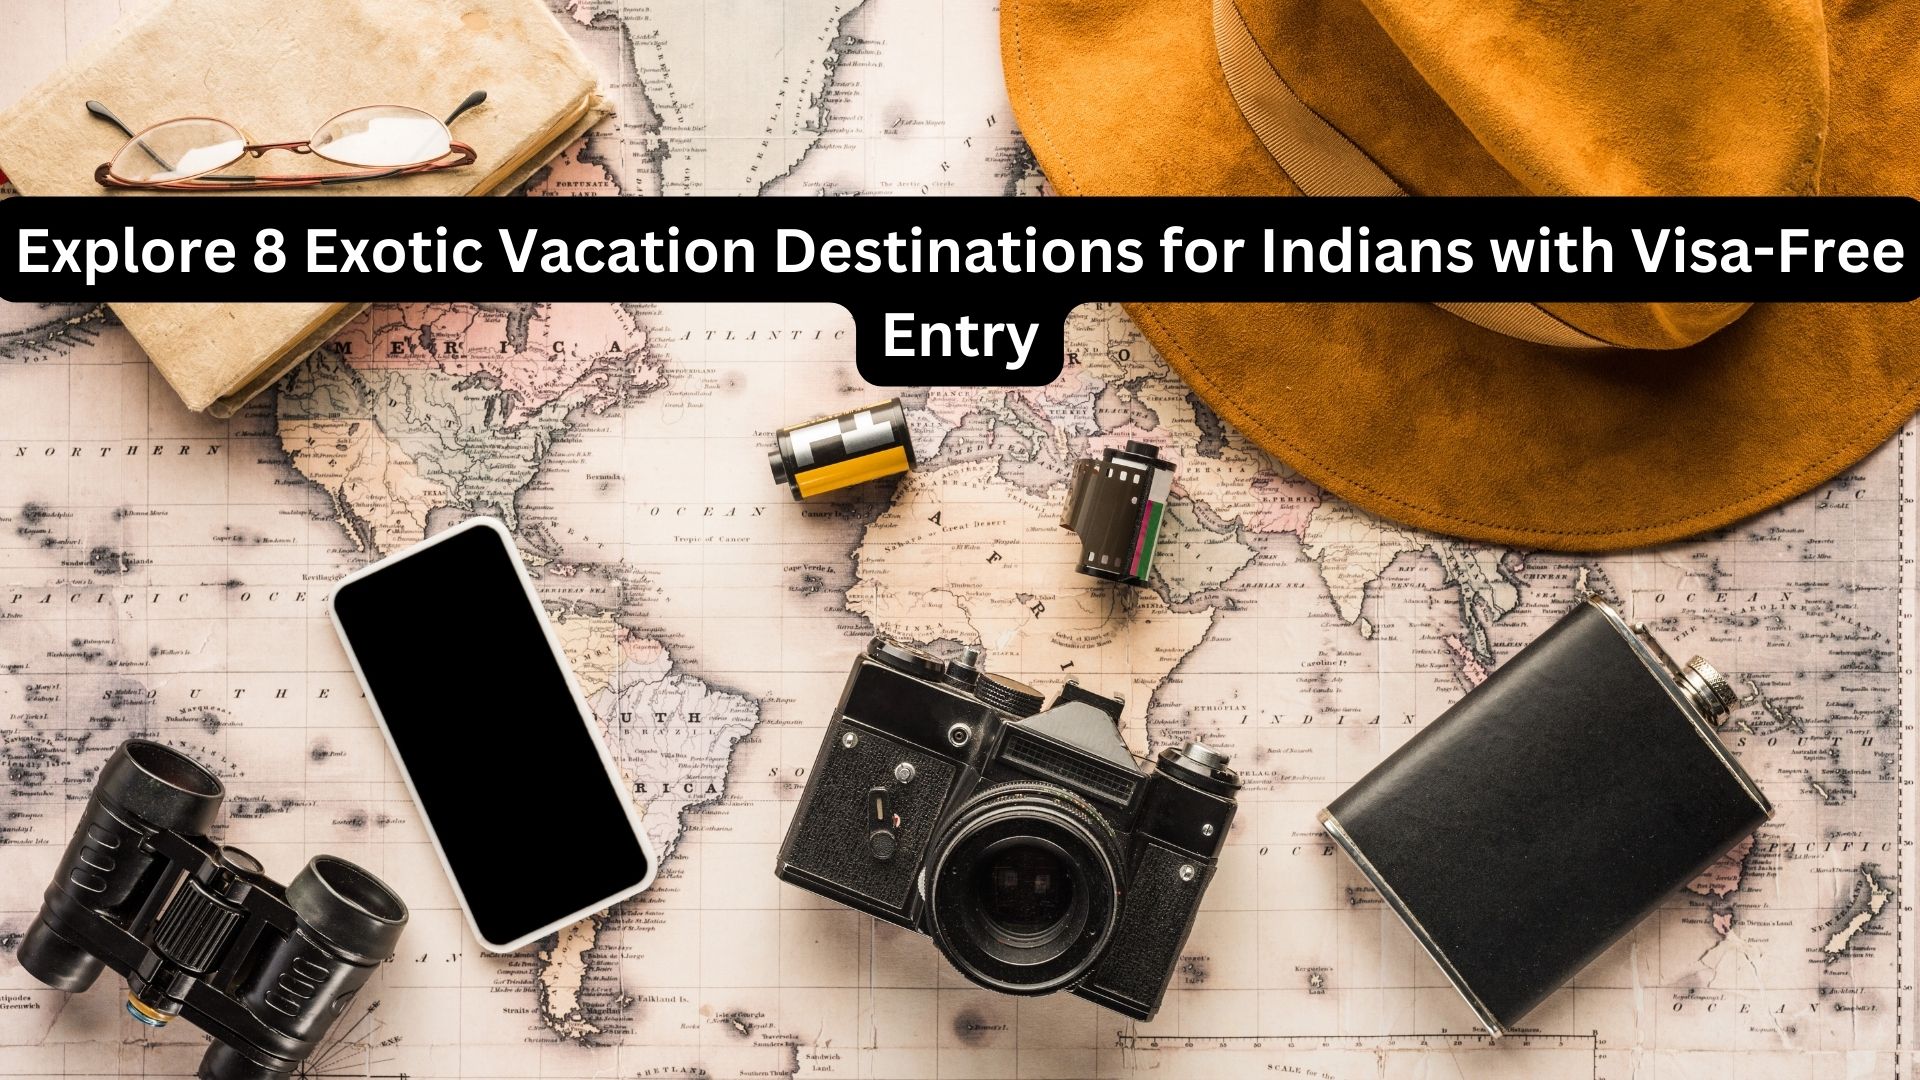 Explore 8 Exotic Vacation Destinations for Indians with Visa-Free Entry